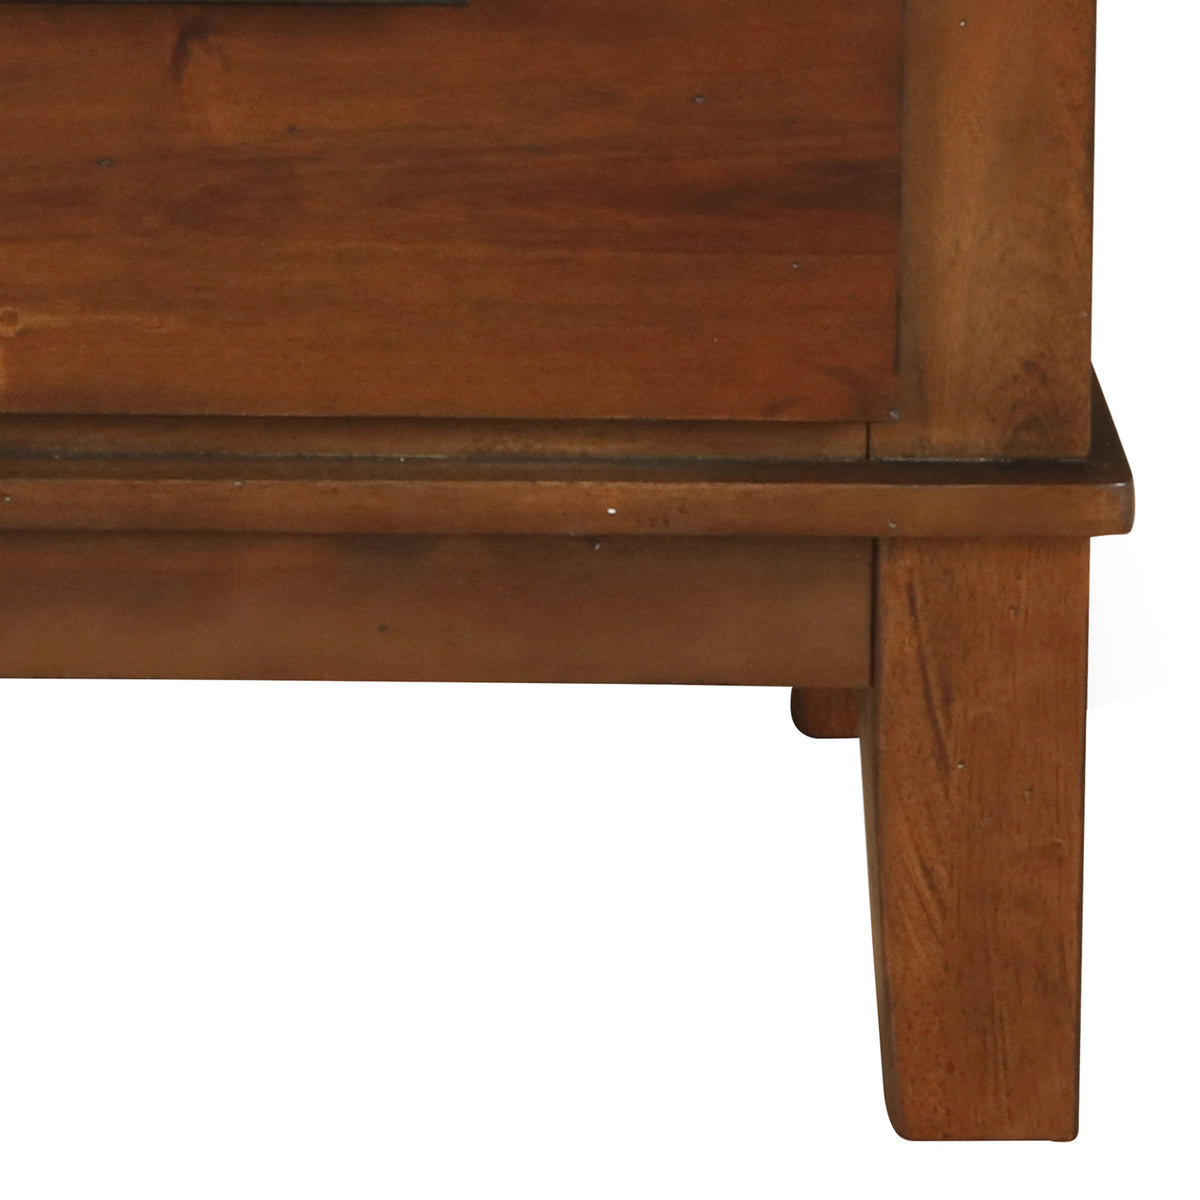 Wooden Nightstand with Chamfered Legs and 2 Spacious Drawers, Brown - BM225824